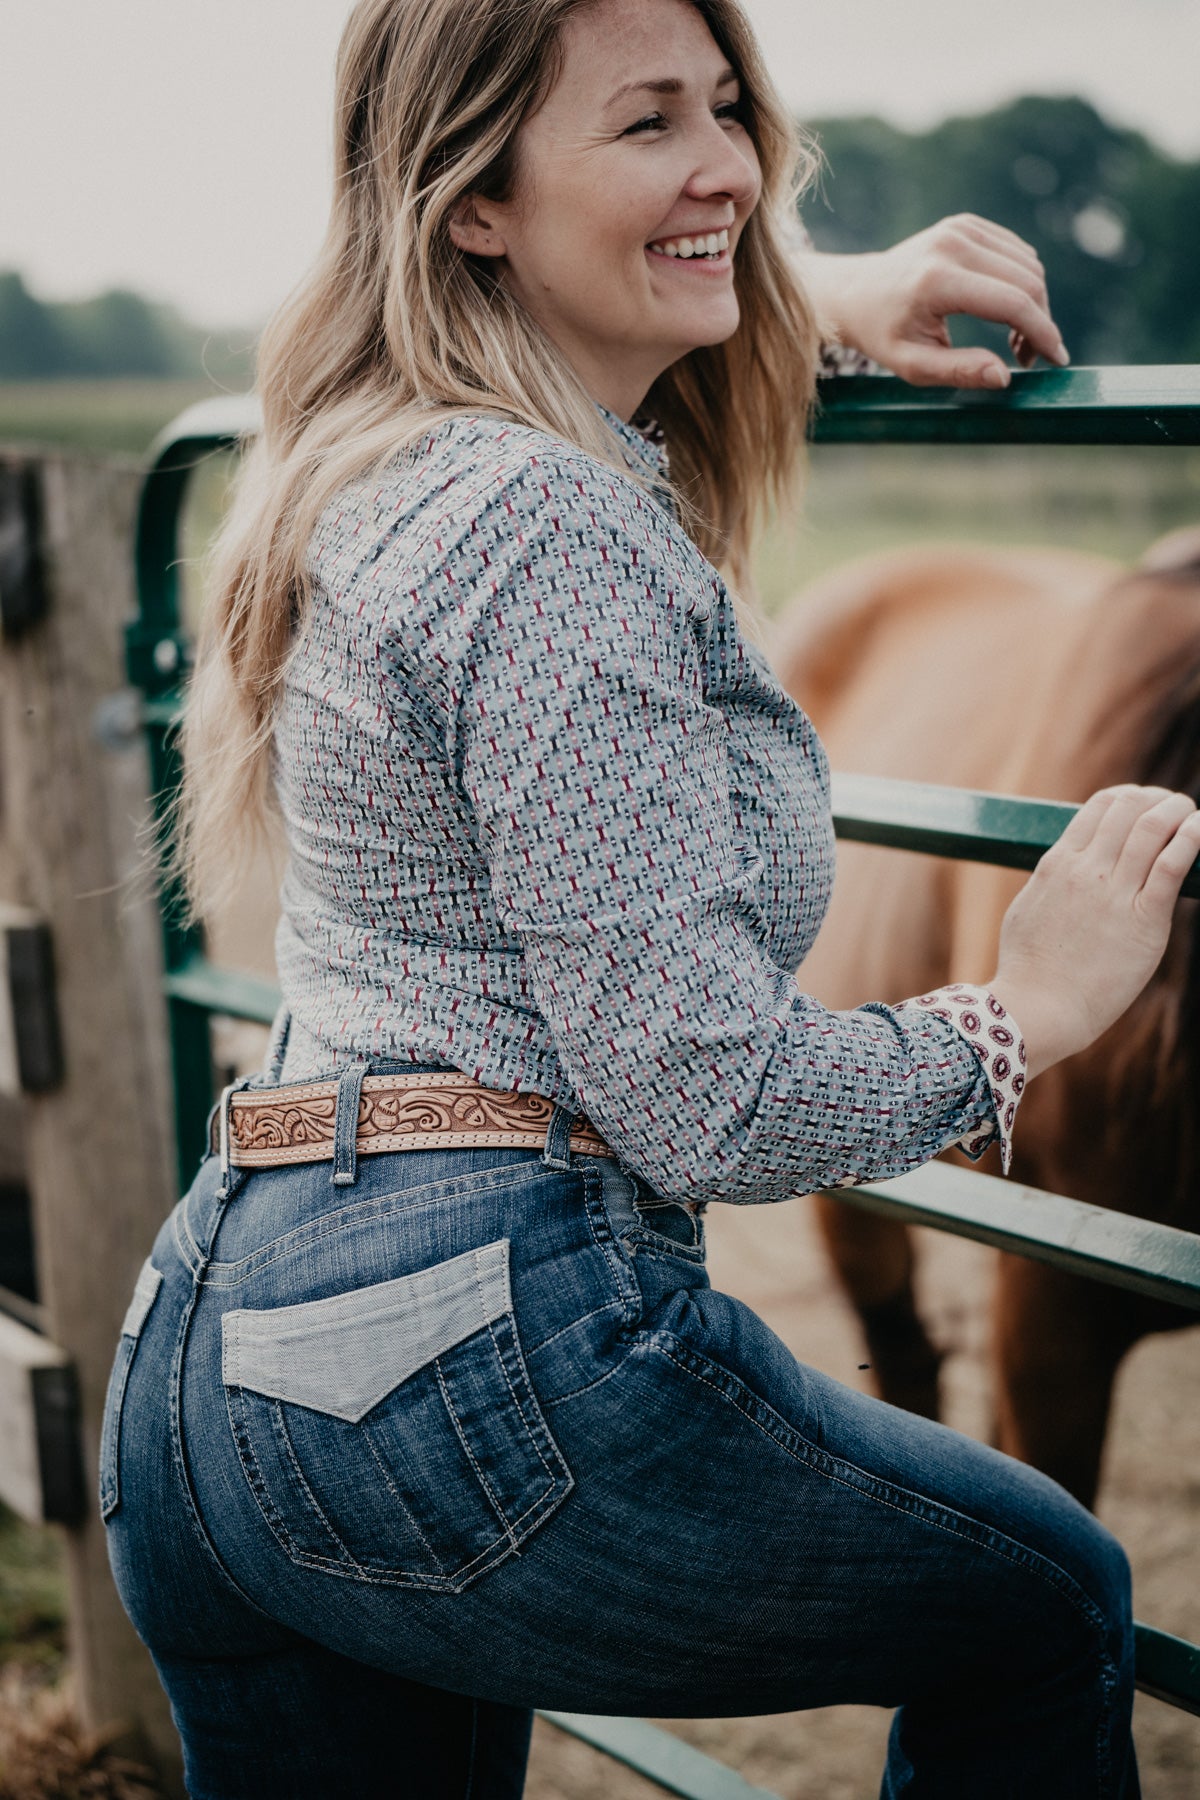 'Robbie' High Rise Mega Flare Jean with Raw Hem by Ariat